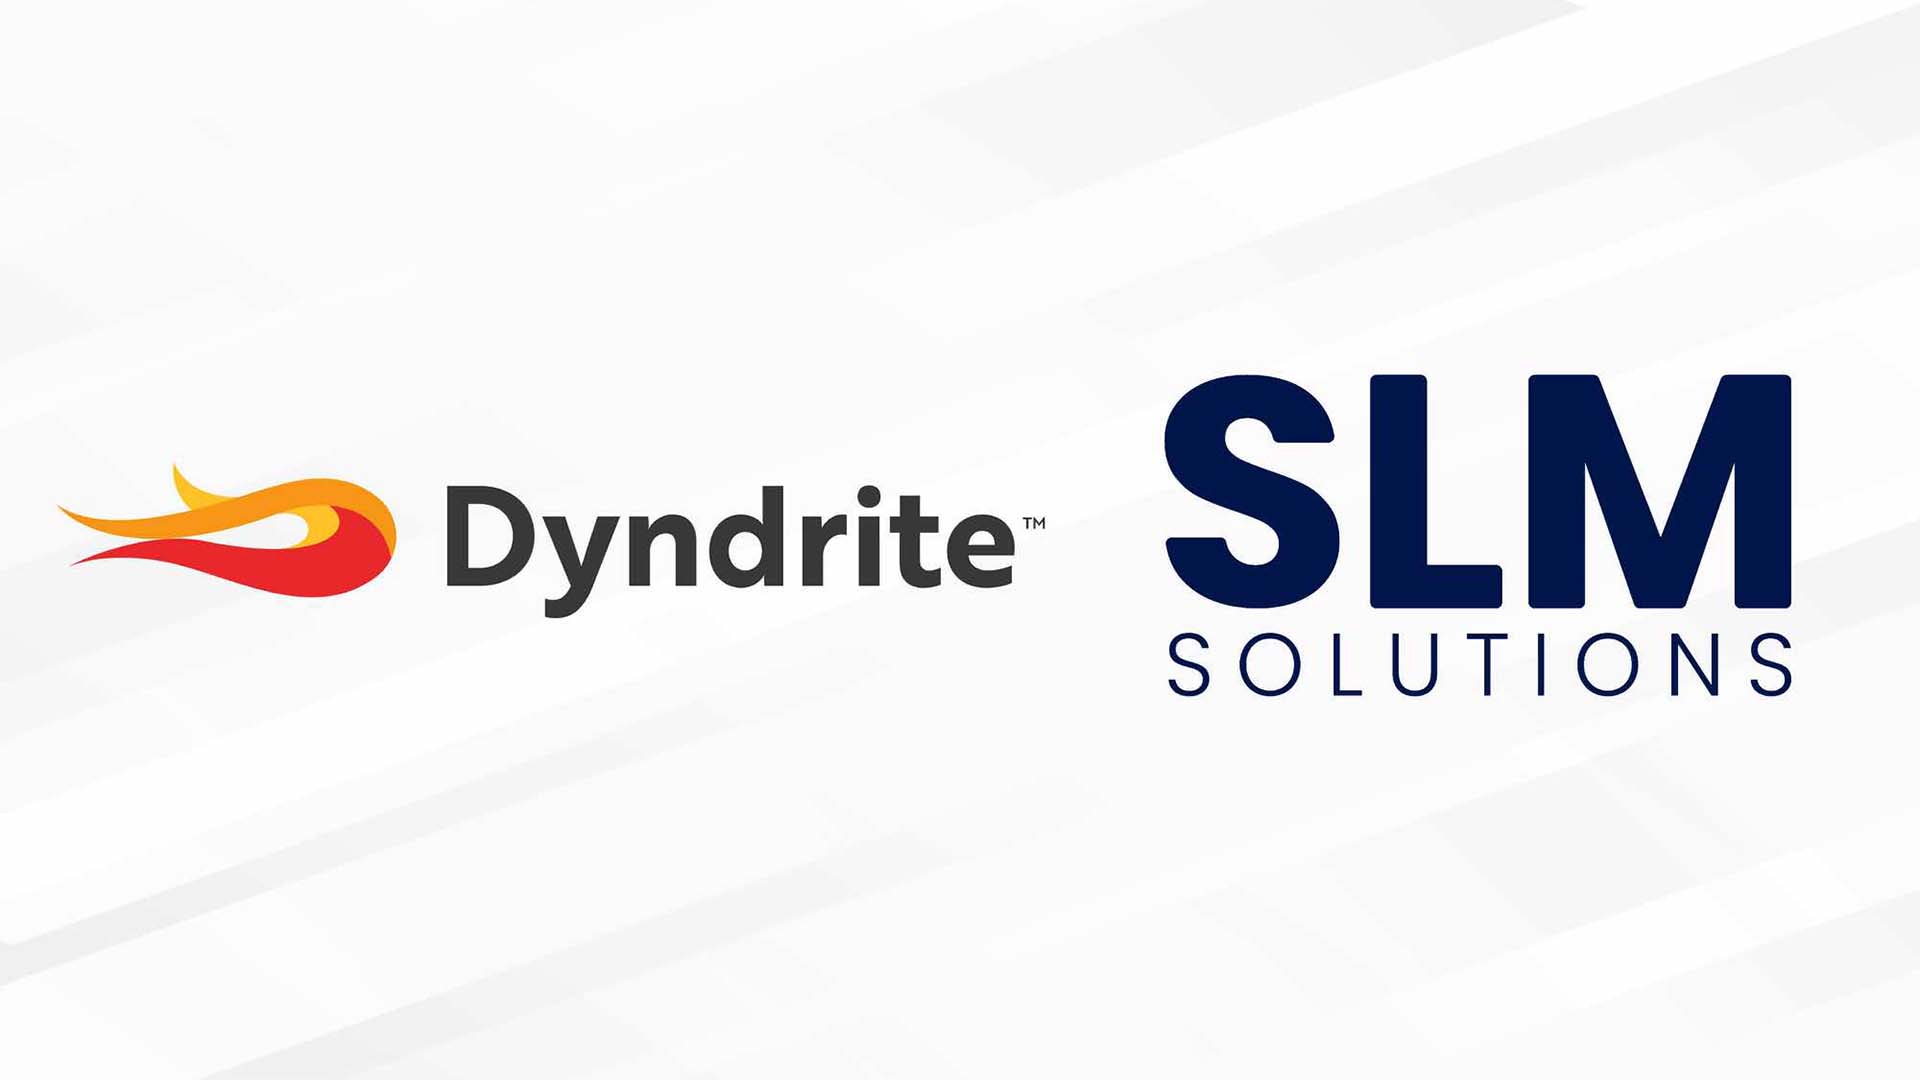 Dyndrite and SLM Solutions join forces